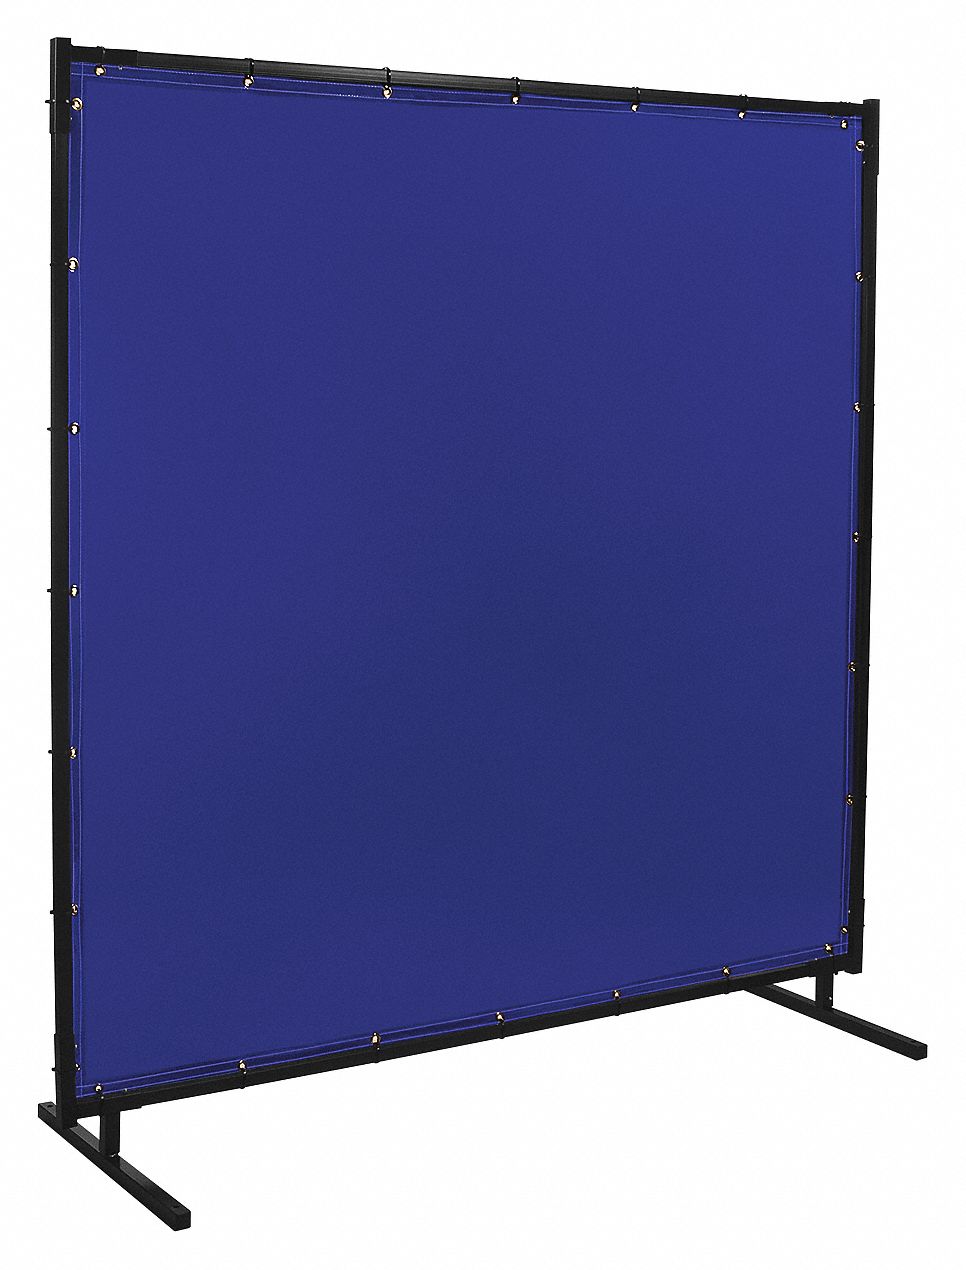 Orange Steiner 548-8X8 Protect-O-Screen Classic Welding Screen with 40 Mil Tinted Transparent Vinyl Curtain 8 x 8 